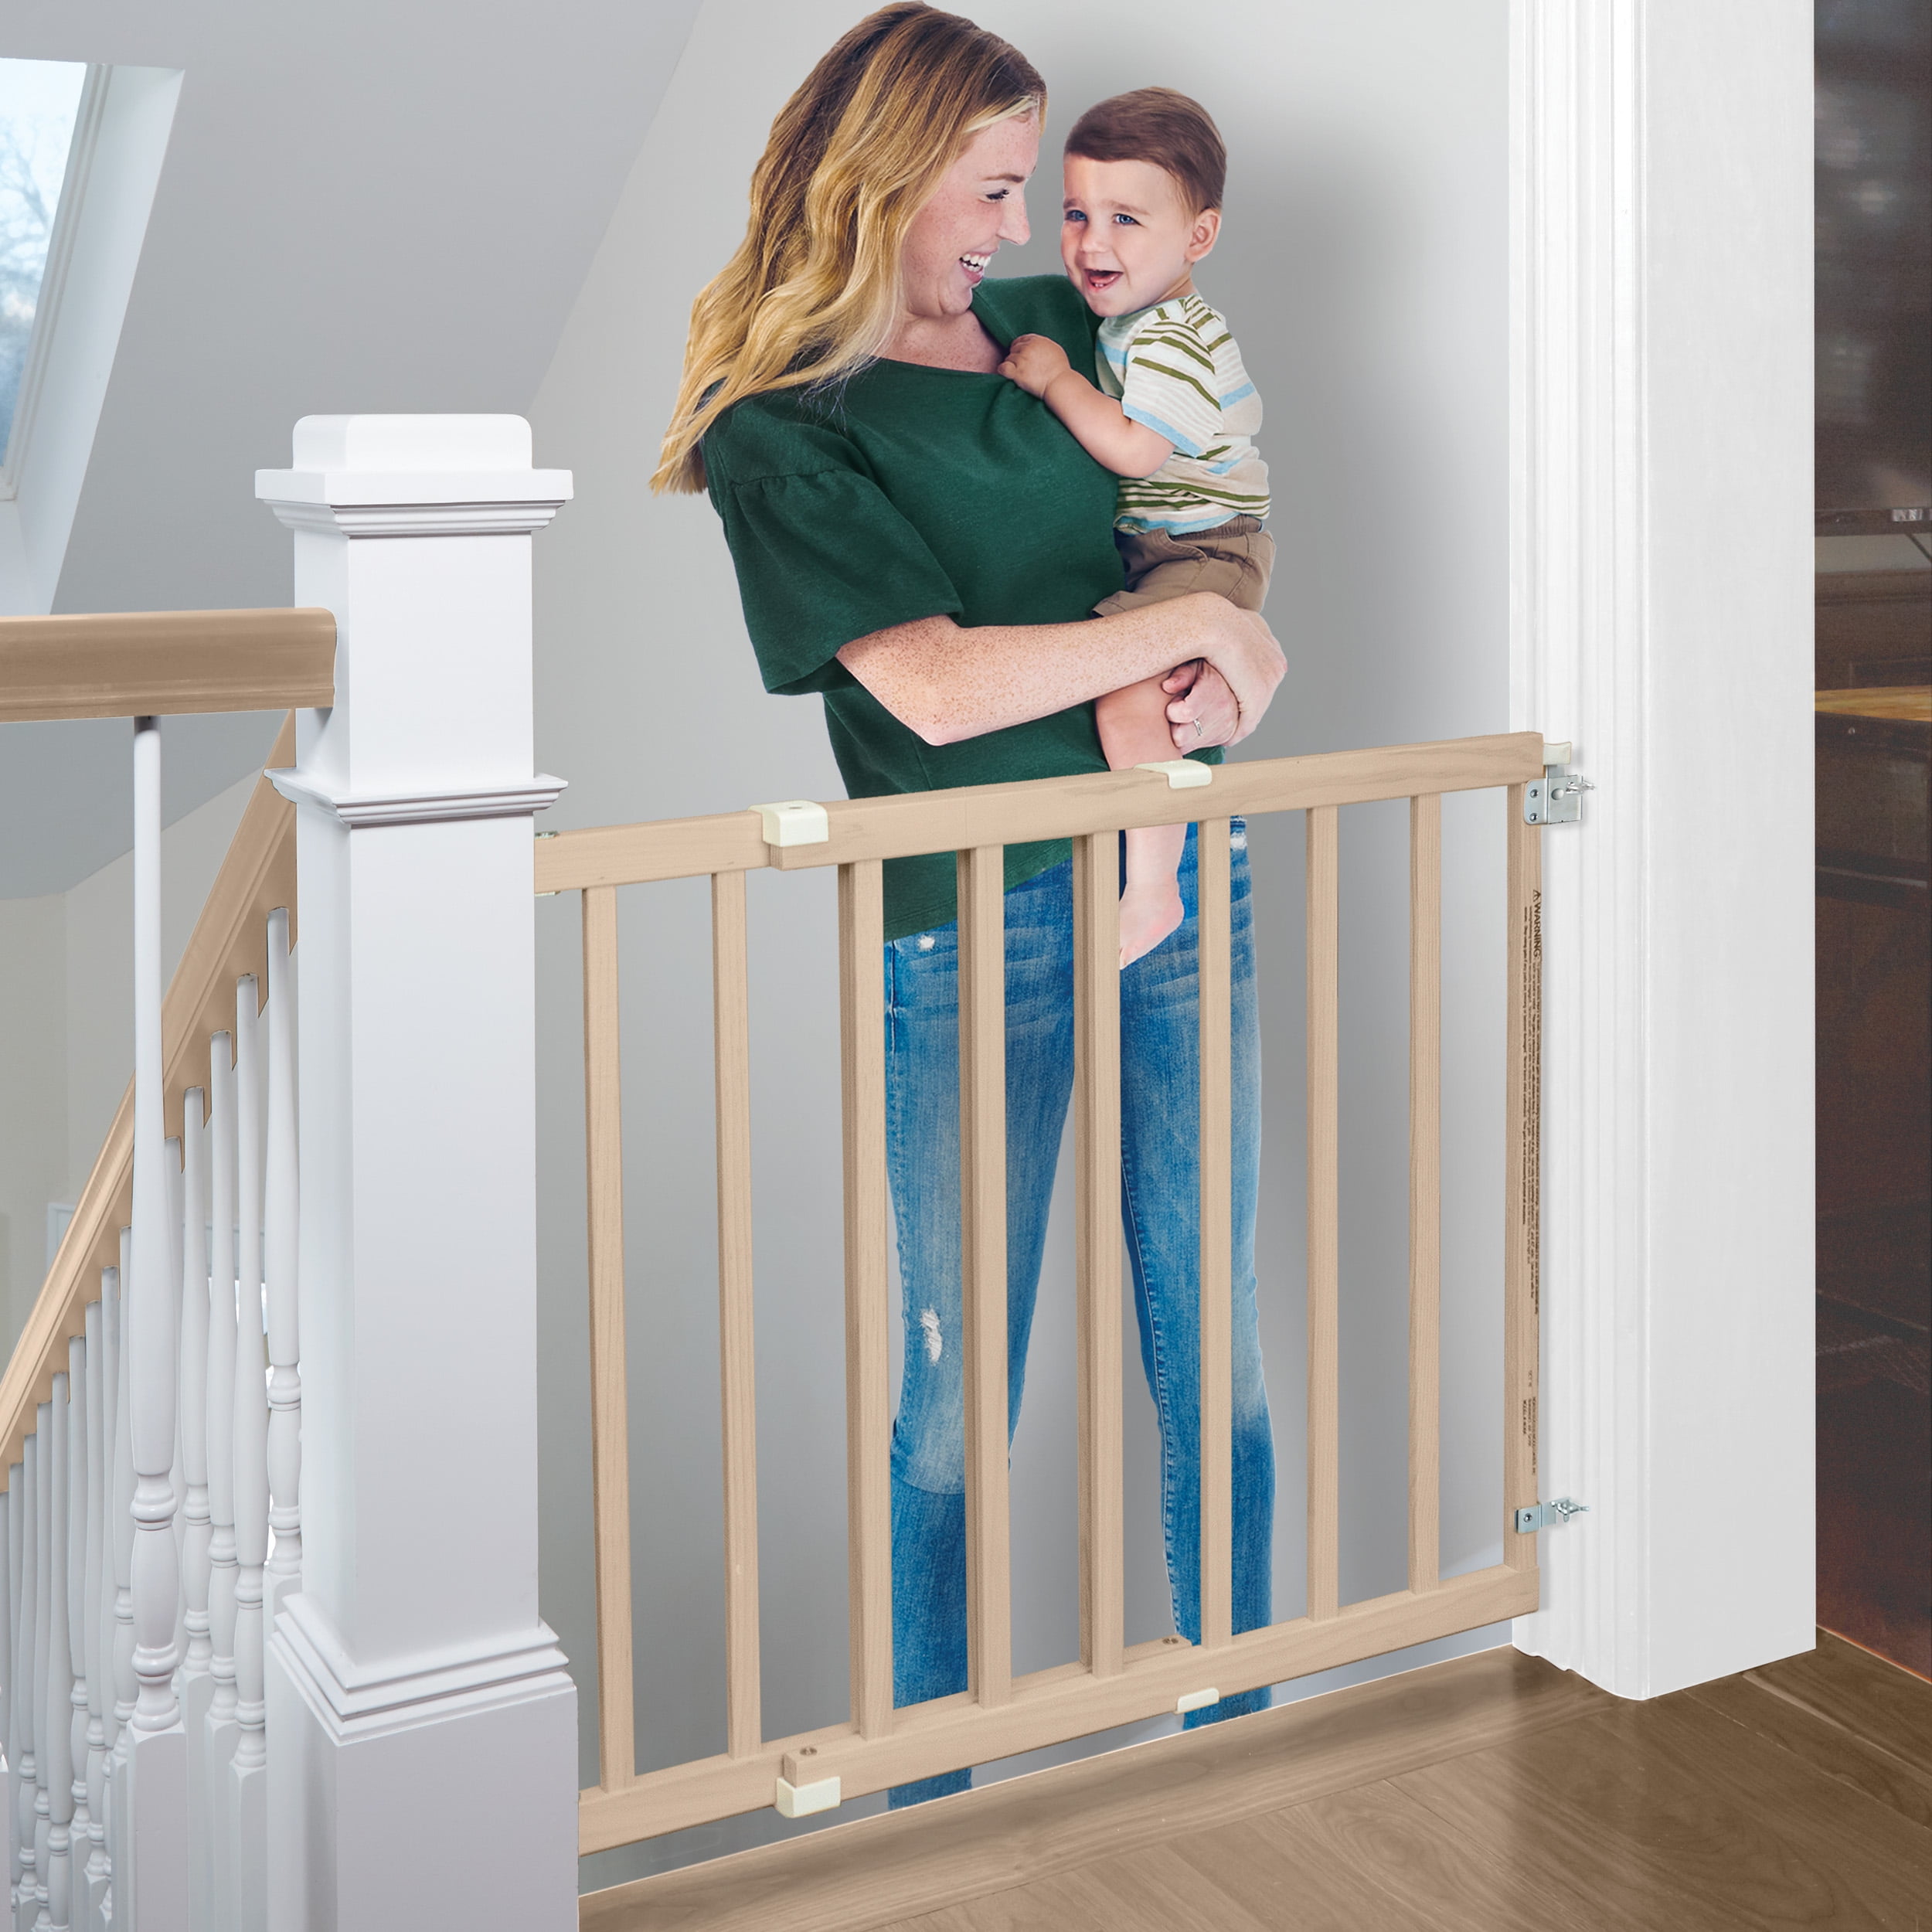 Includes Banister and Wall Kits Regalo 2-In-1 Stairway and Hallway Baby Gate 